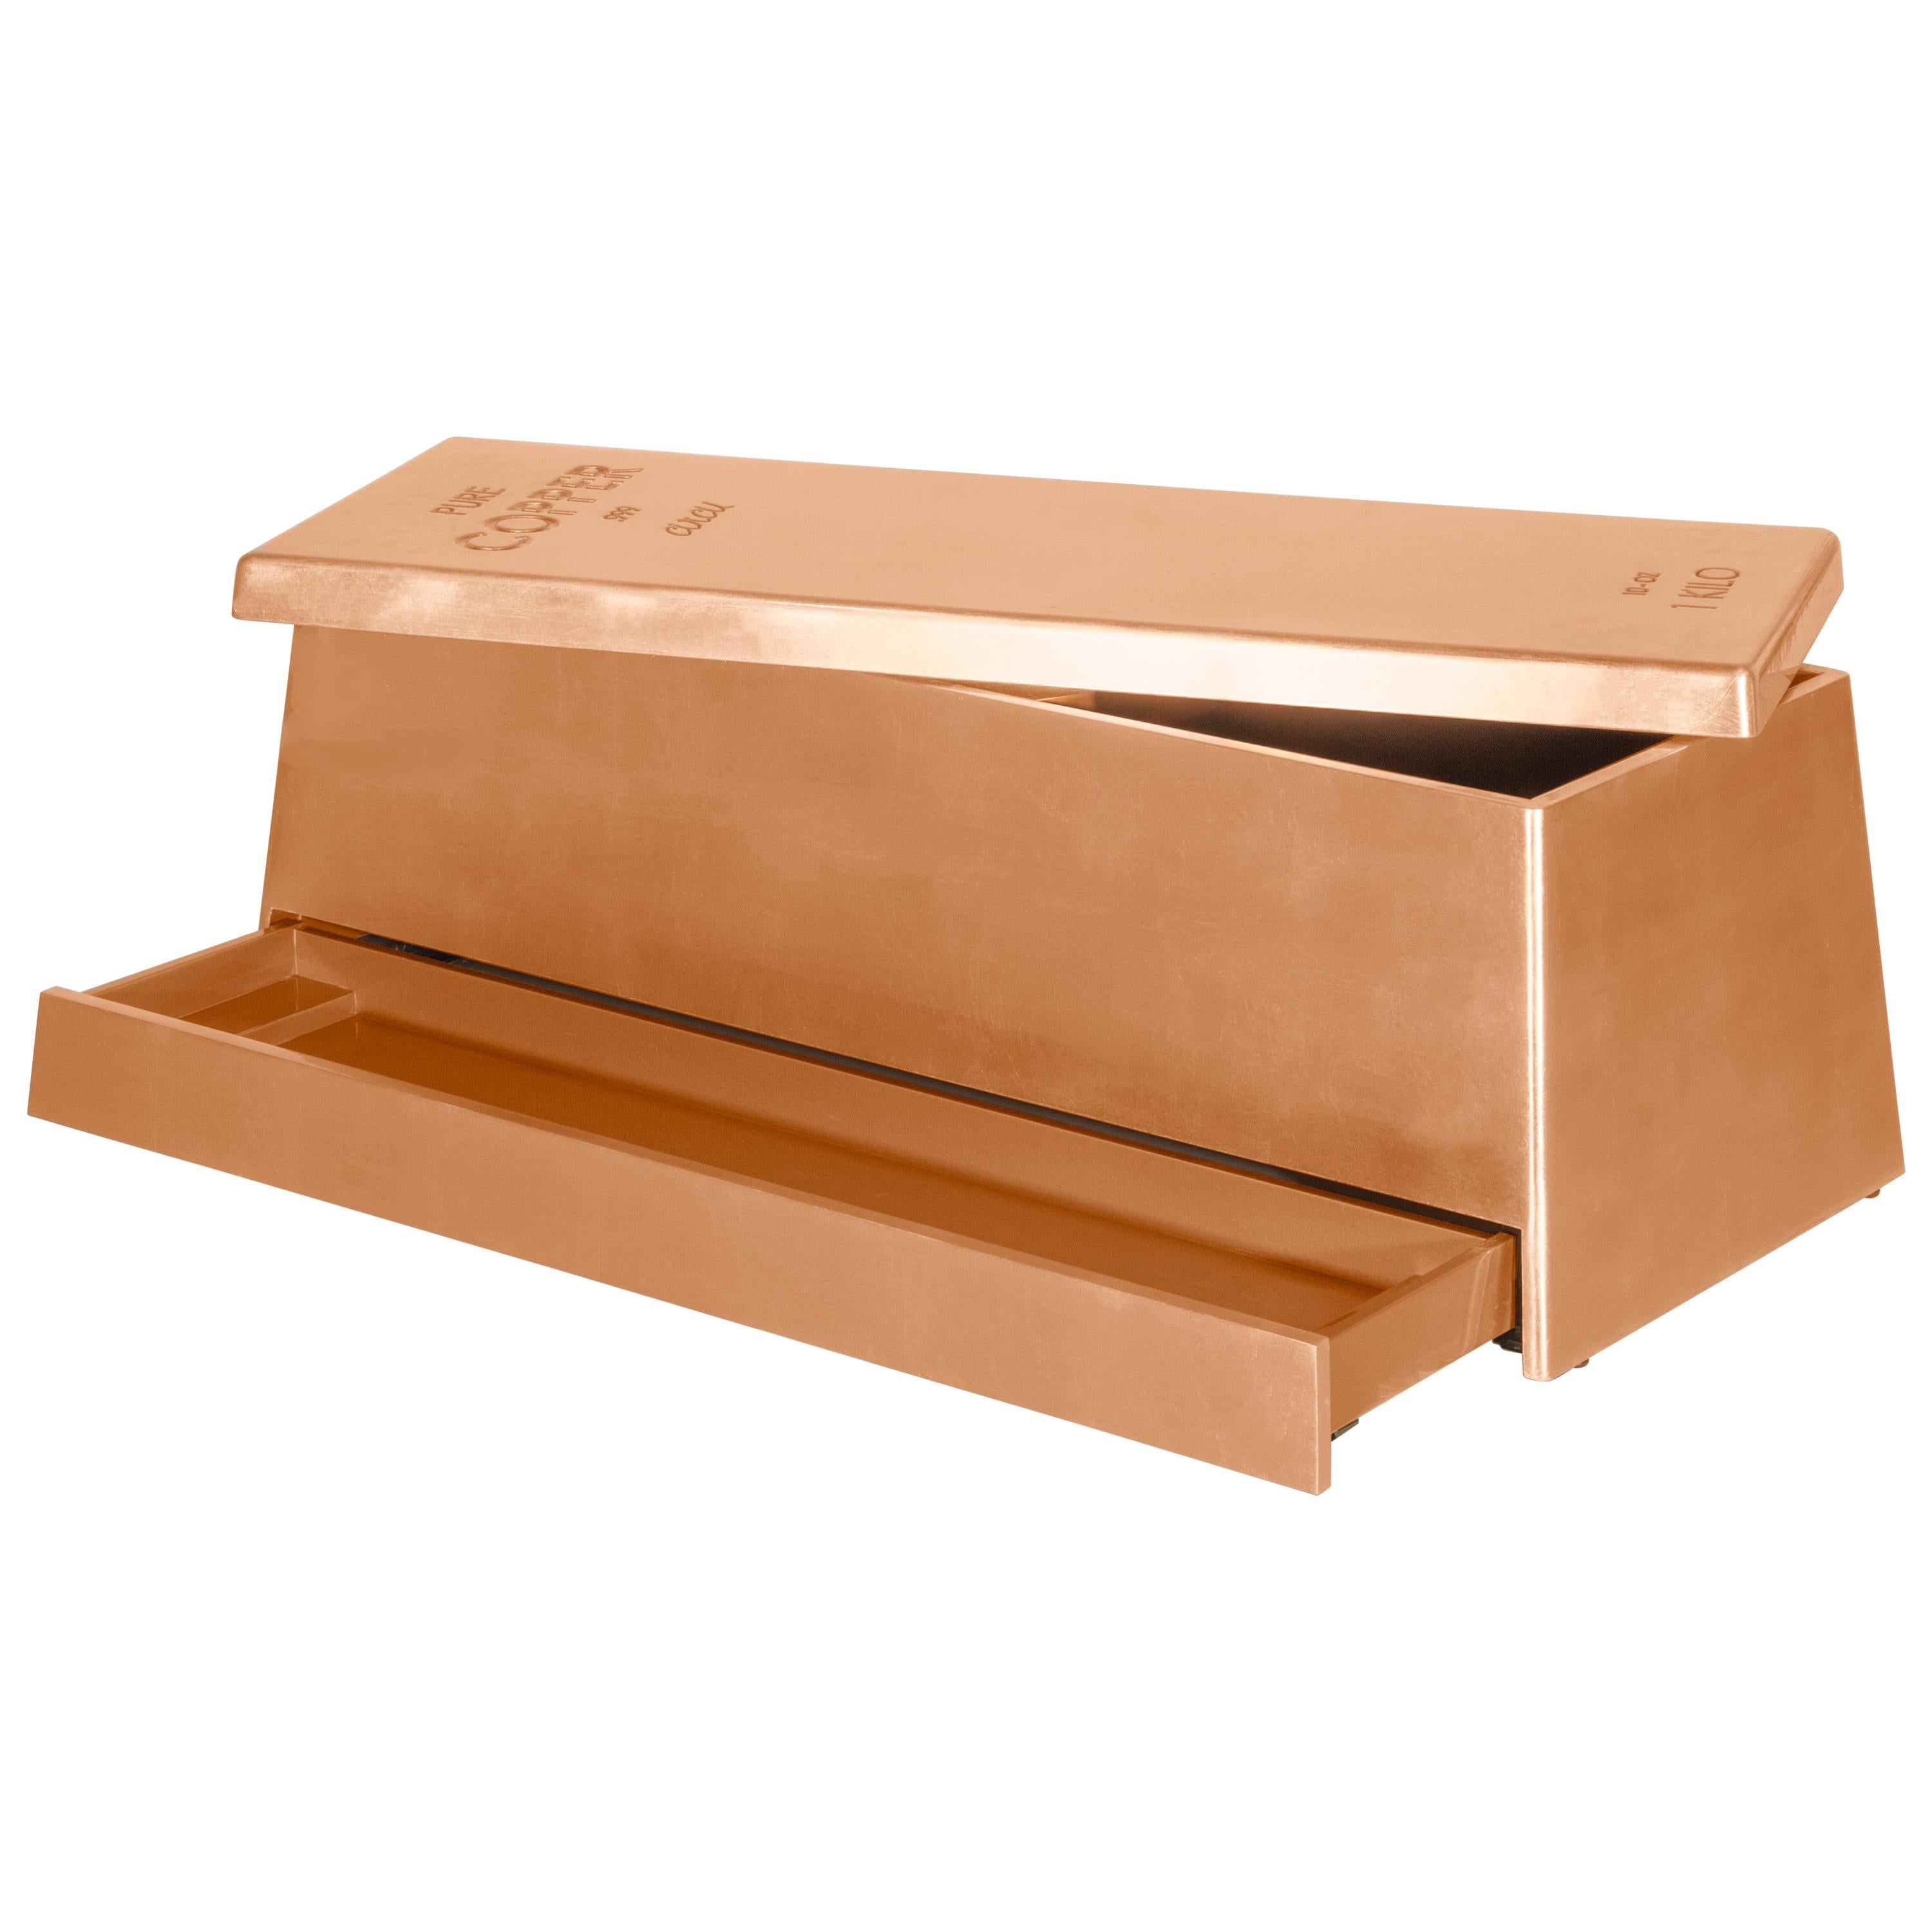 Copper Kids Toy Box in Wood with a Copper Finish by Circu Magical Furniture

Copper Kids Toy Box in Wood with a Copper Finish by Circu Magical Furniture is a kids’ toy box inspired by the fine copper bar shape. This toy box is a useful storage